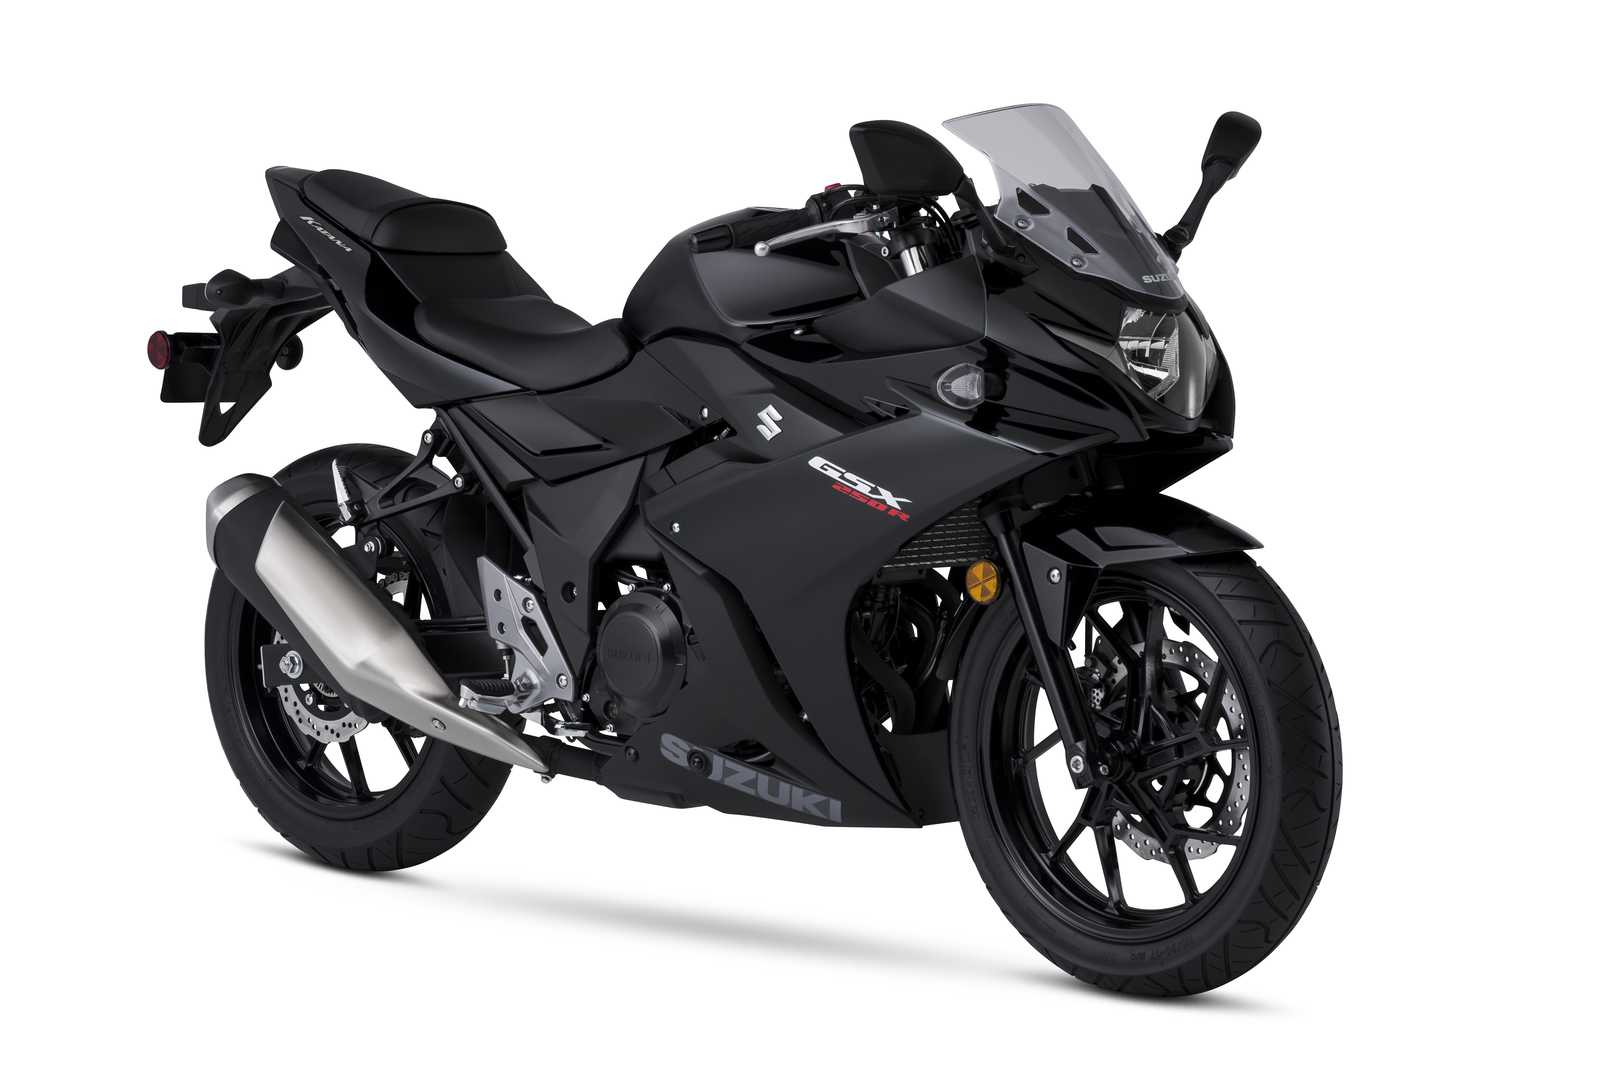 dal forbrug belastning Suzuki Introduces Twin-Cylinder 2018 GSX250R Katana For American Market,  With Projected On-Sale Date Of April 2017 - Roadracing World Magazine |  Motorcycle Riding, Racing & Tech News